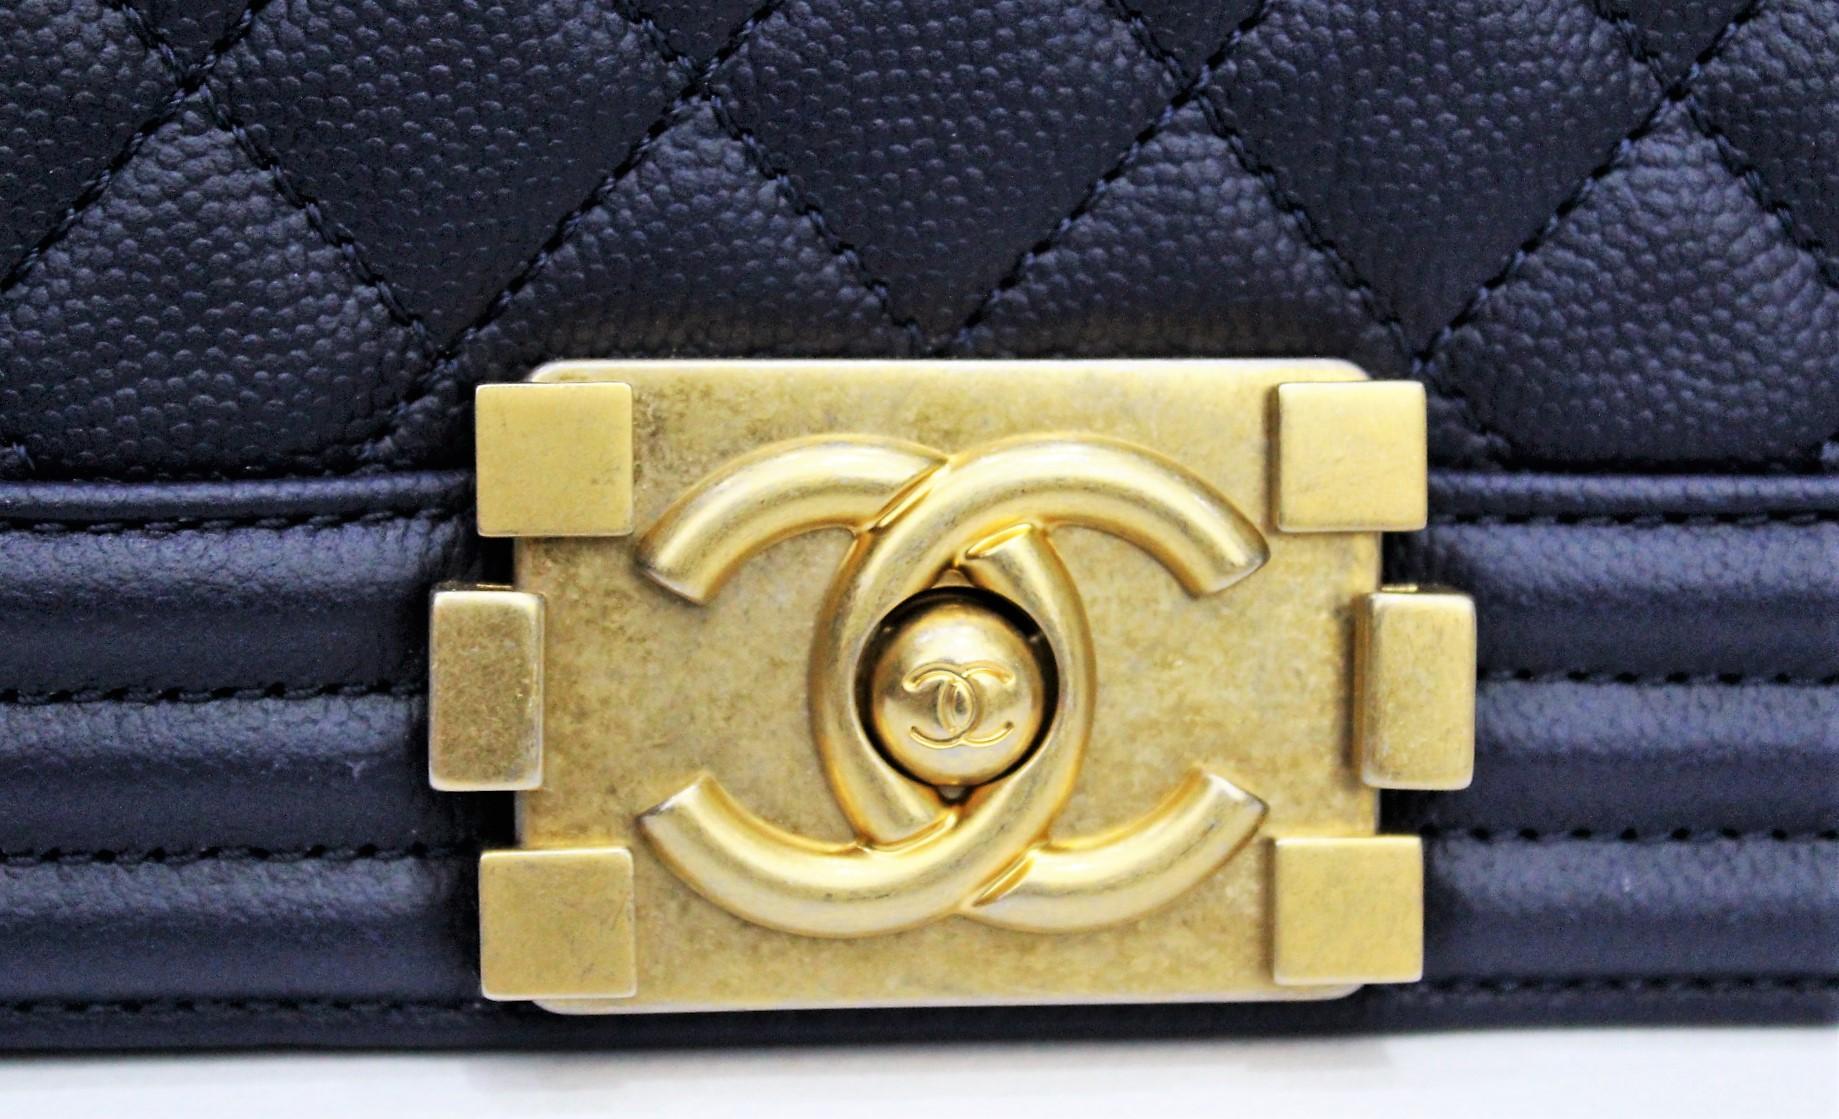 Fantastic Chanel Boy Mini in dark blue quilted lambskin with gold-colored hardware. The bag features a full front flap with CC signature push lock and gold color chain and blue leather shoulder strap. The interior is lined in blue fabric. We have